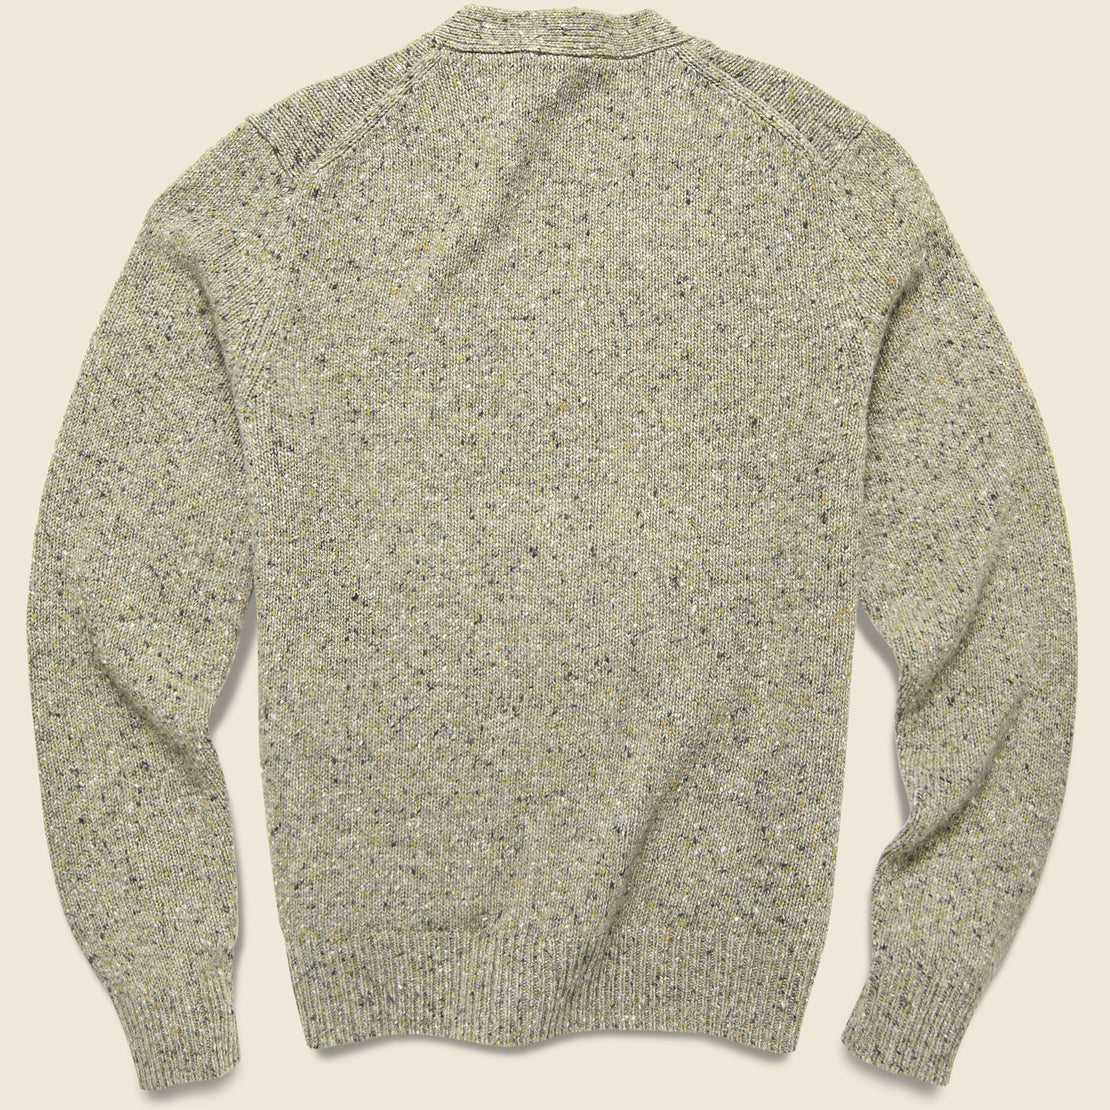 Donegal Cardigan - Grassland - Alex Mill - STAG Provisions - Tops - Sweater